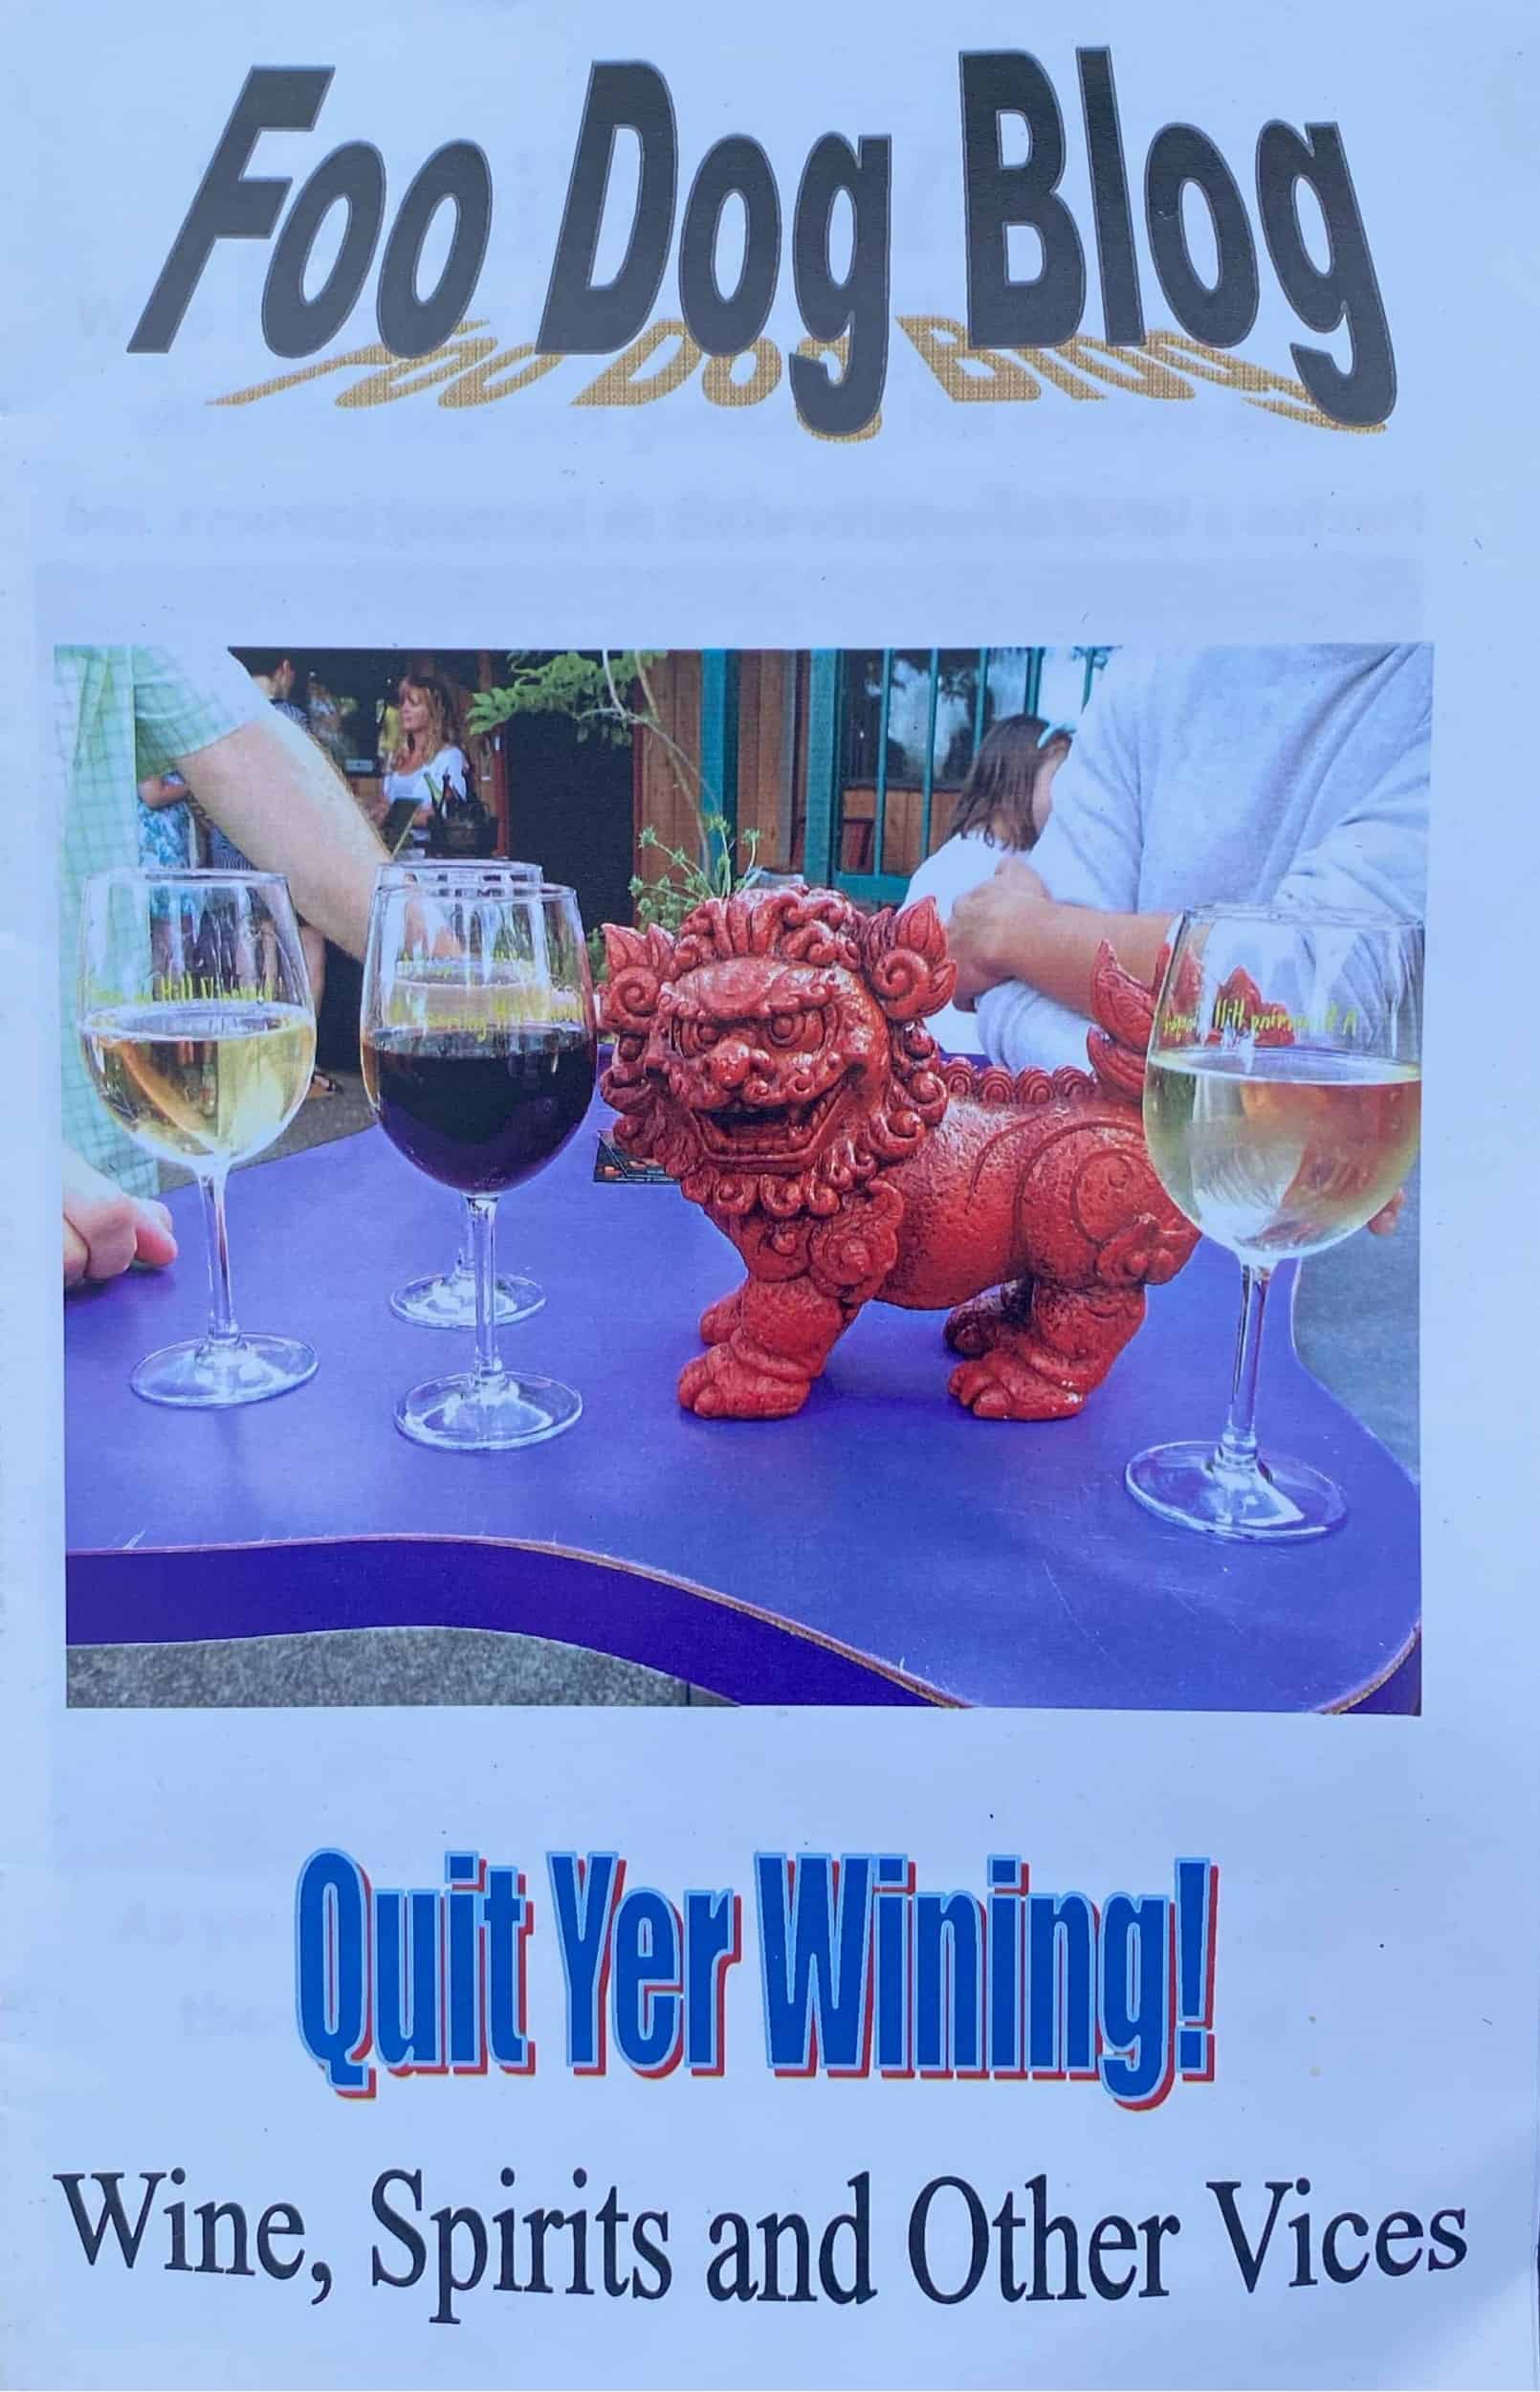 This Quit Yer Wining! Wine, Spirits, and Other Vices (Foo Dog Blog Mini Book) is made with love by Victoria J. Hyla (Author)/Victorious Editing Services! Shop more unique gift ideas today with Spots Initiatives, the best way to support creators.